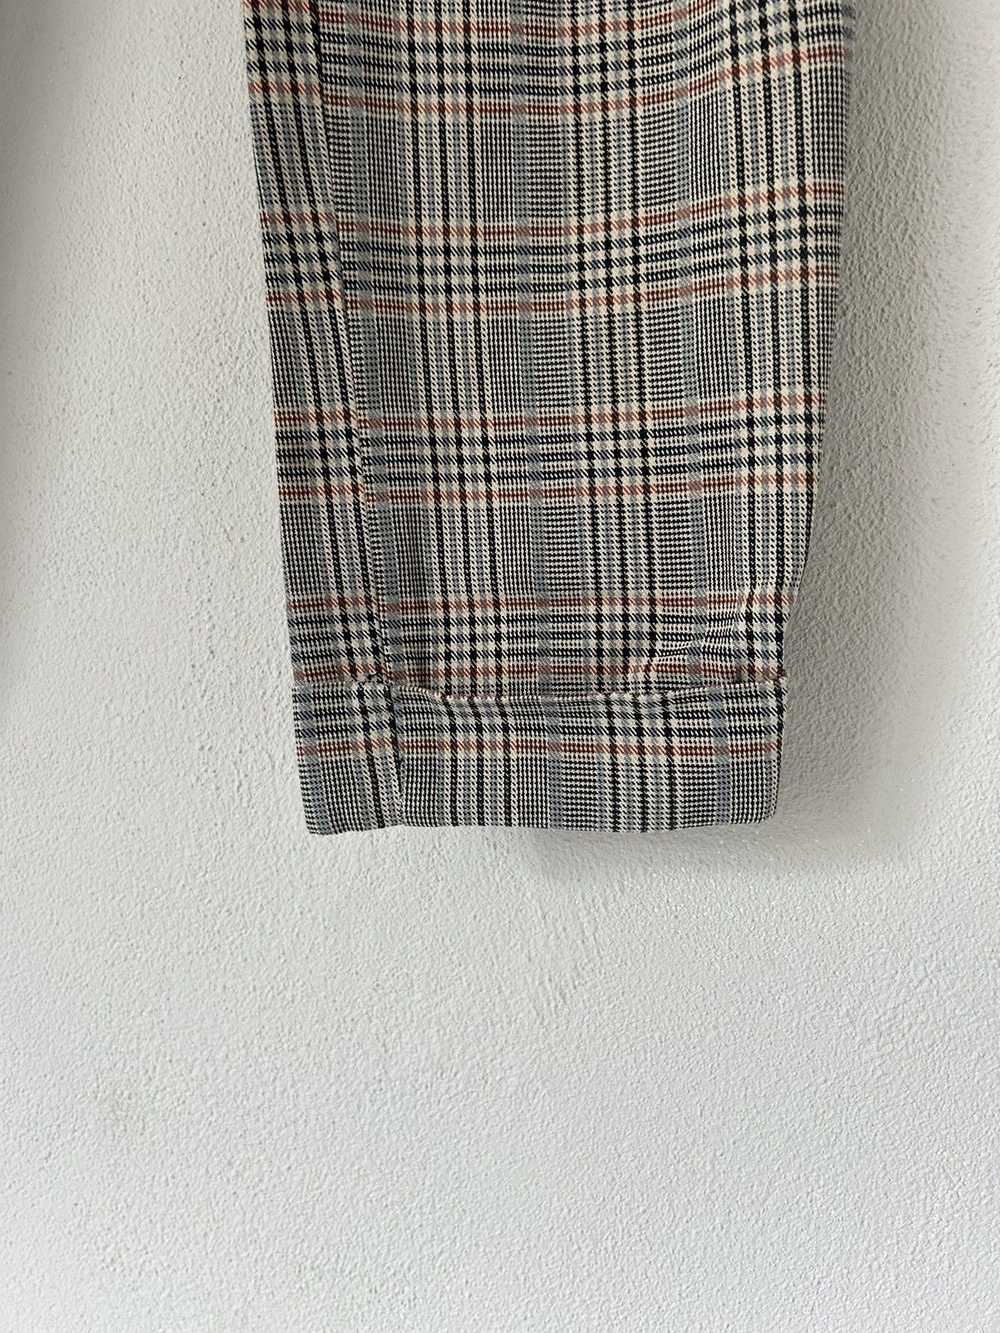 Gucci Checkered Plaid Trousers - image 6